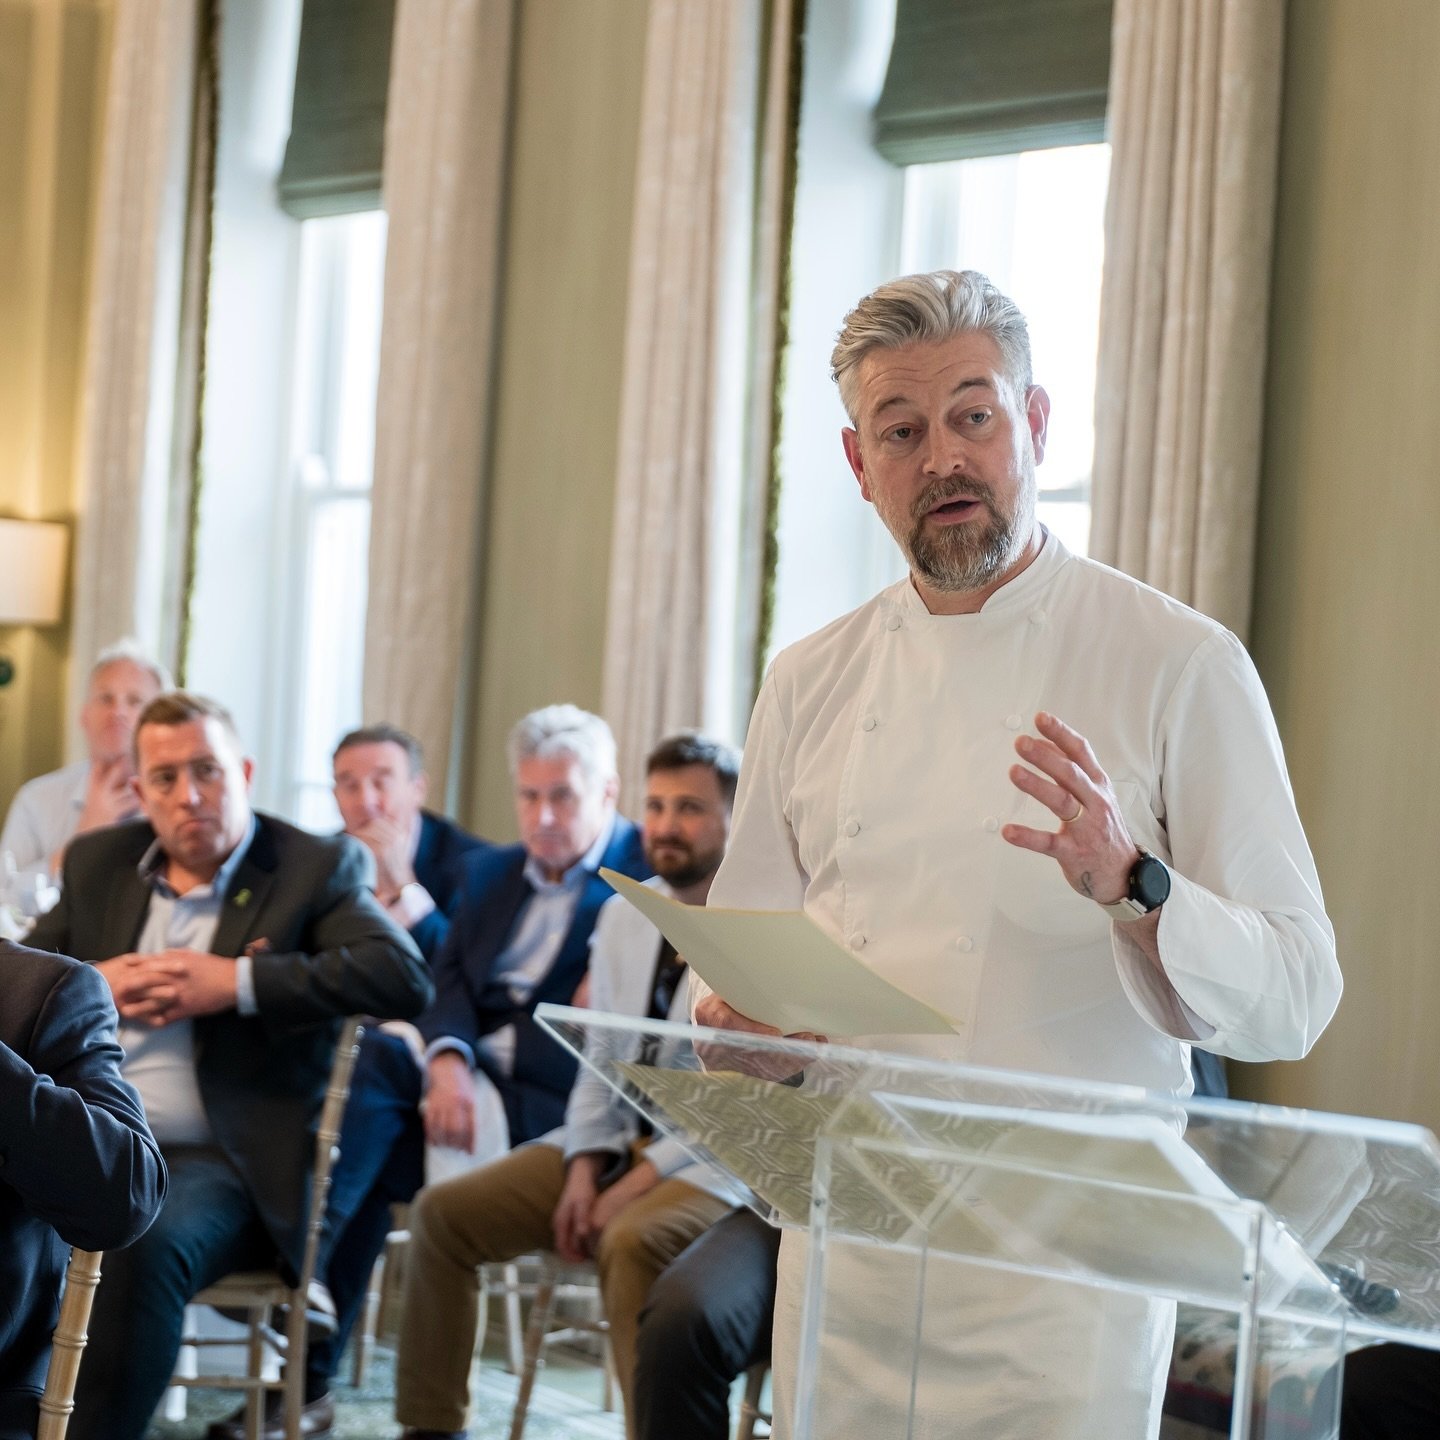 Thank you so much to everyone who joined us for what was a very exciting Plenary Meeting at the beautiful @browns_hotel!

Please join us welcoming our indomitable new Chair, @adambyatt, who also hosted us for our delicious lunch on Monday afternoon.
